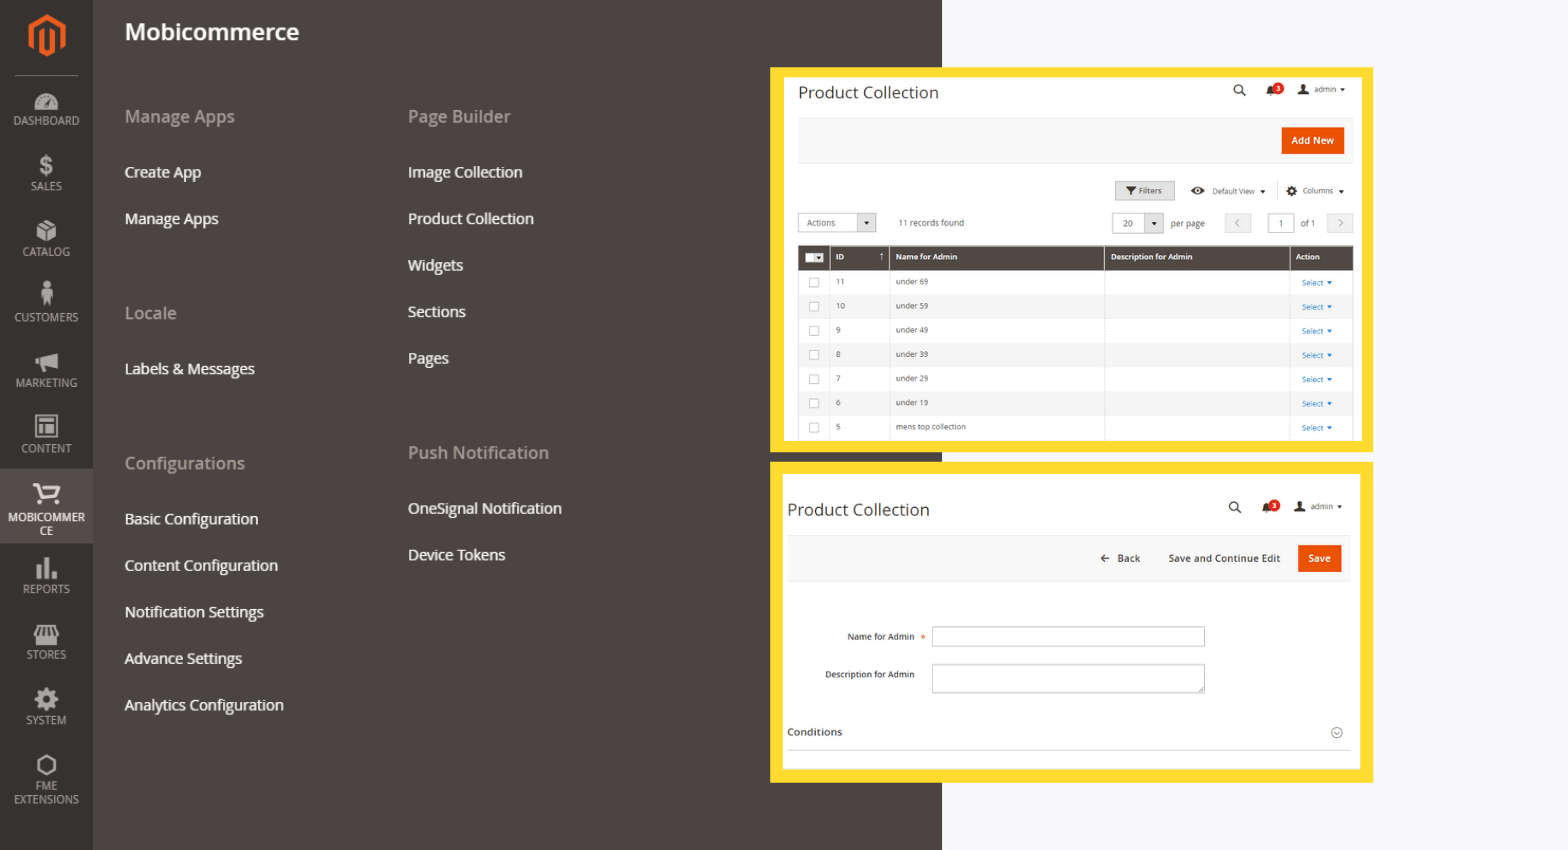 A virtual/dynamic product listing functionality